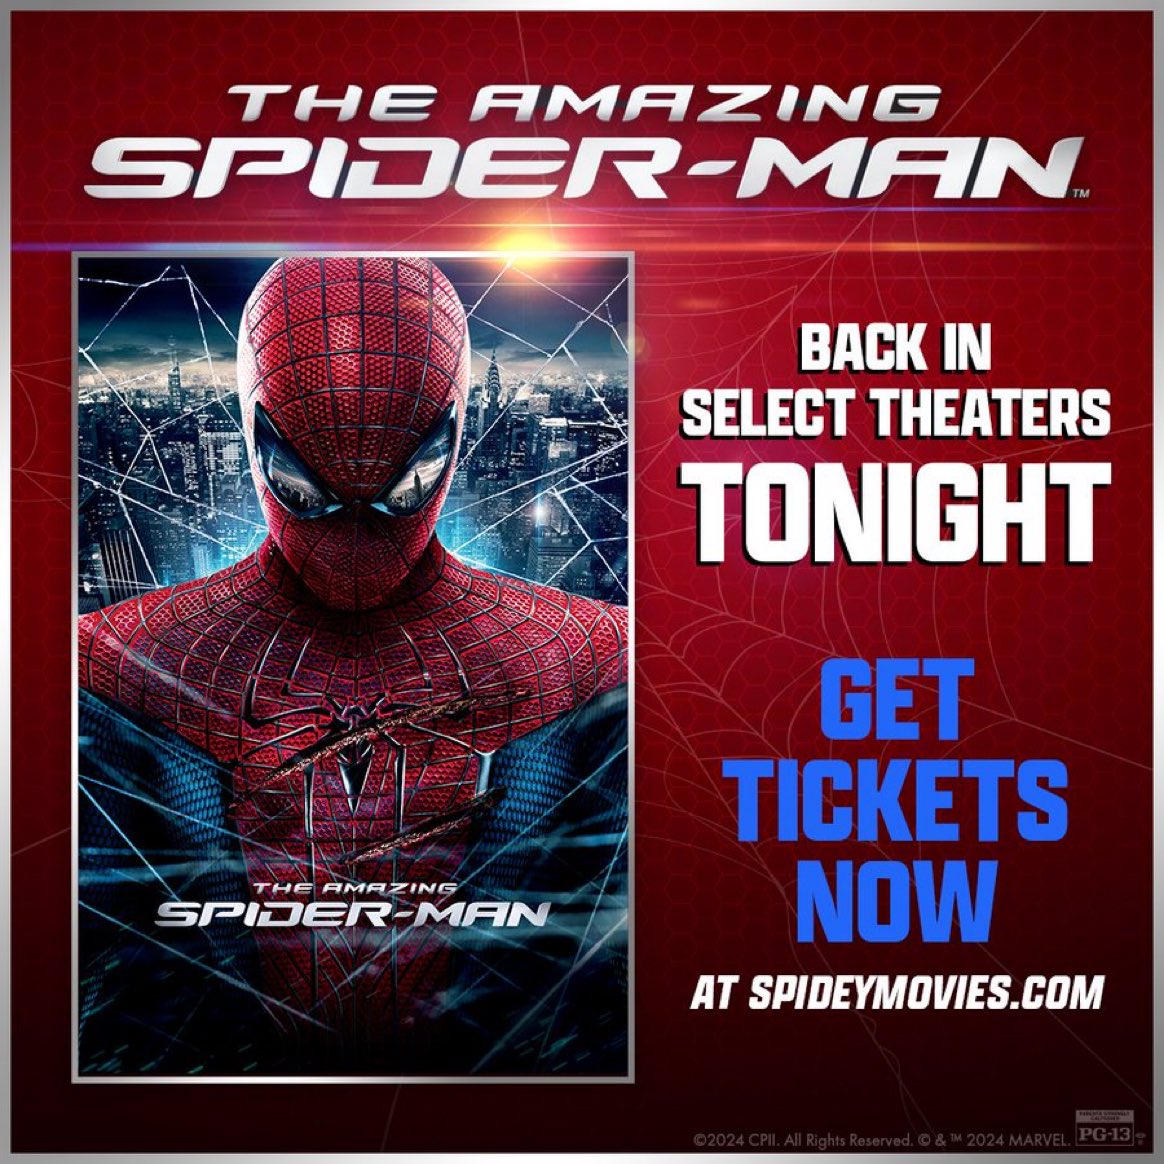 #TheAmazingSpiderMan is BACK in select theaters beginning tonight for a limited time. Get tickets: spideymovies.com